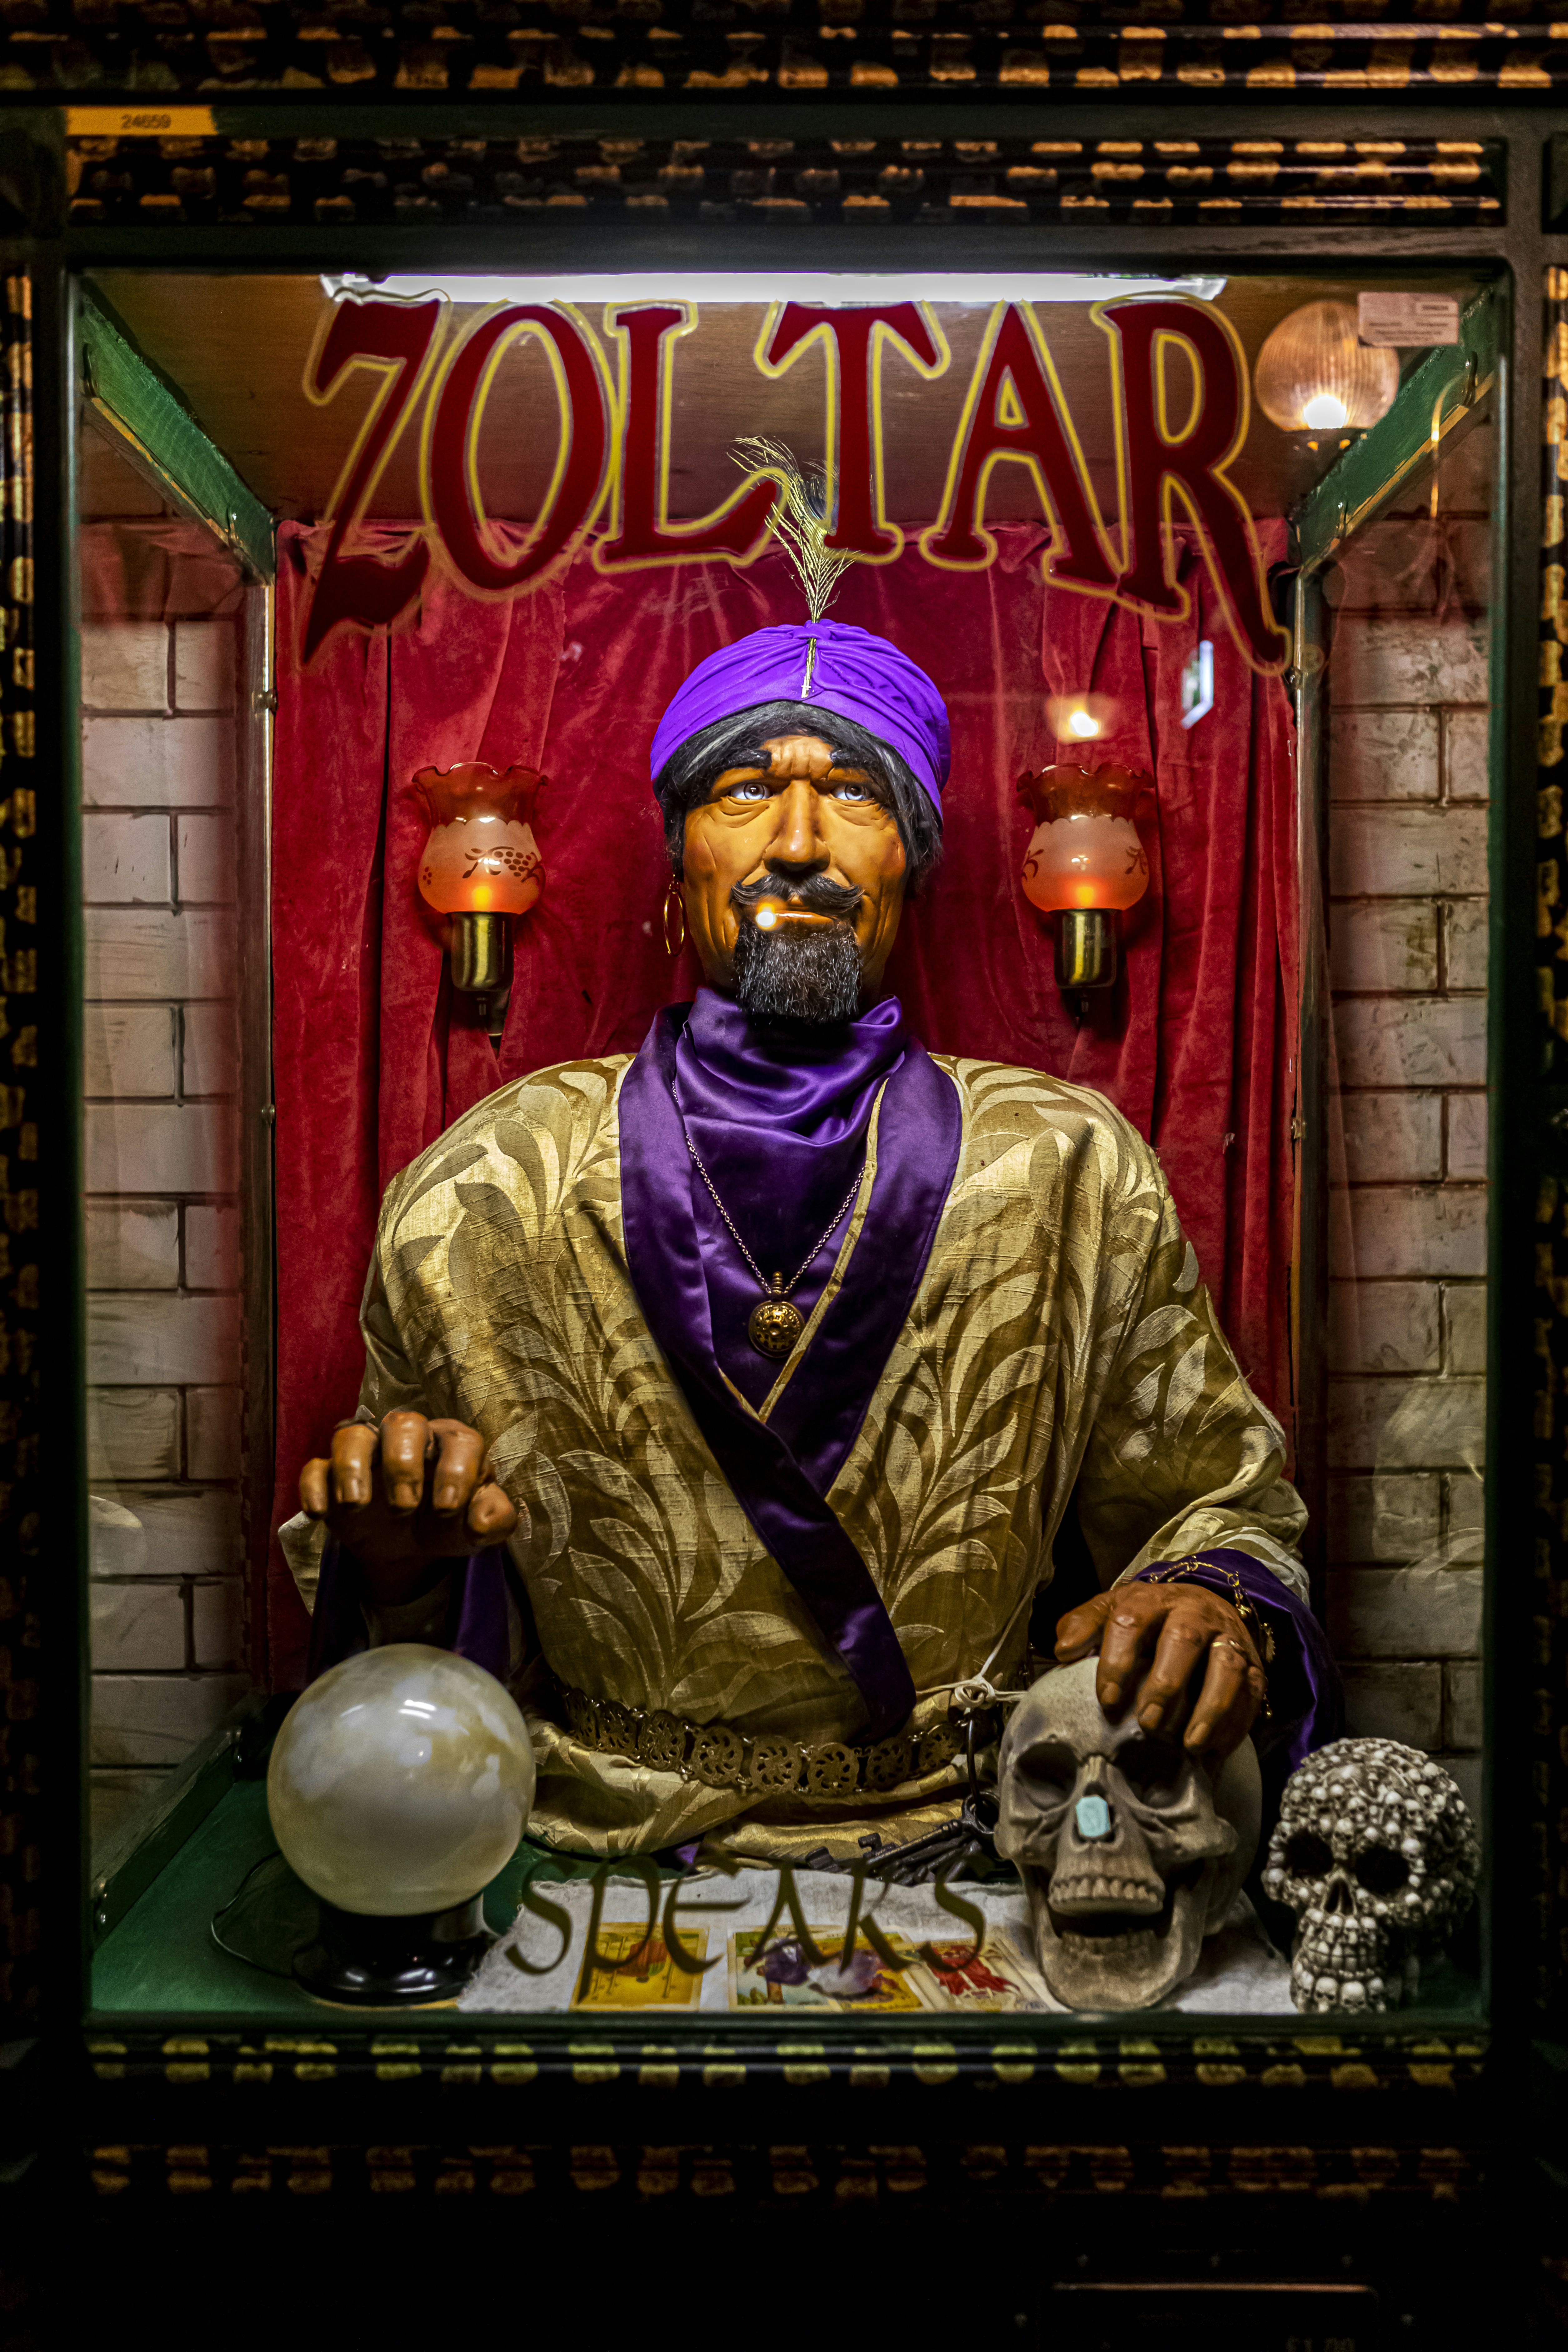 Zoltar Speaks - the soothsayer booth at the London Dungeon's exit cafe. Fate, future, tarot, mysticism in London, England, UK. January 2020.